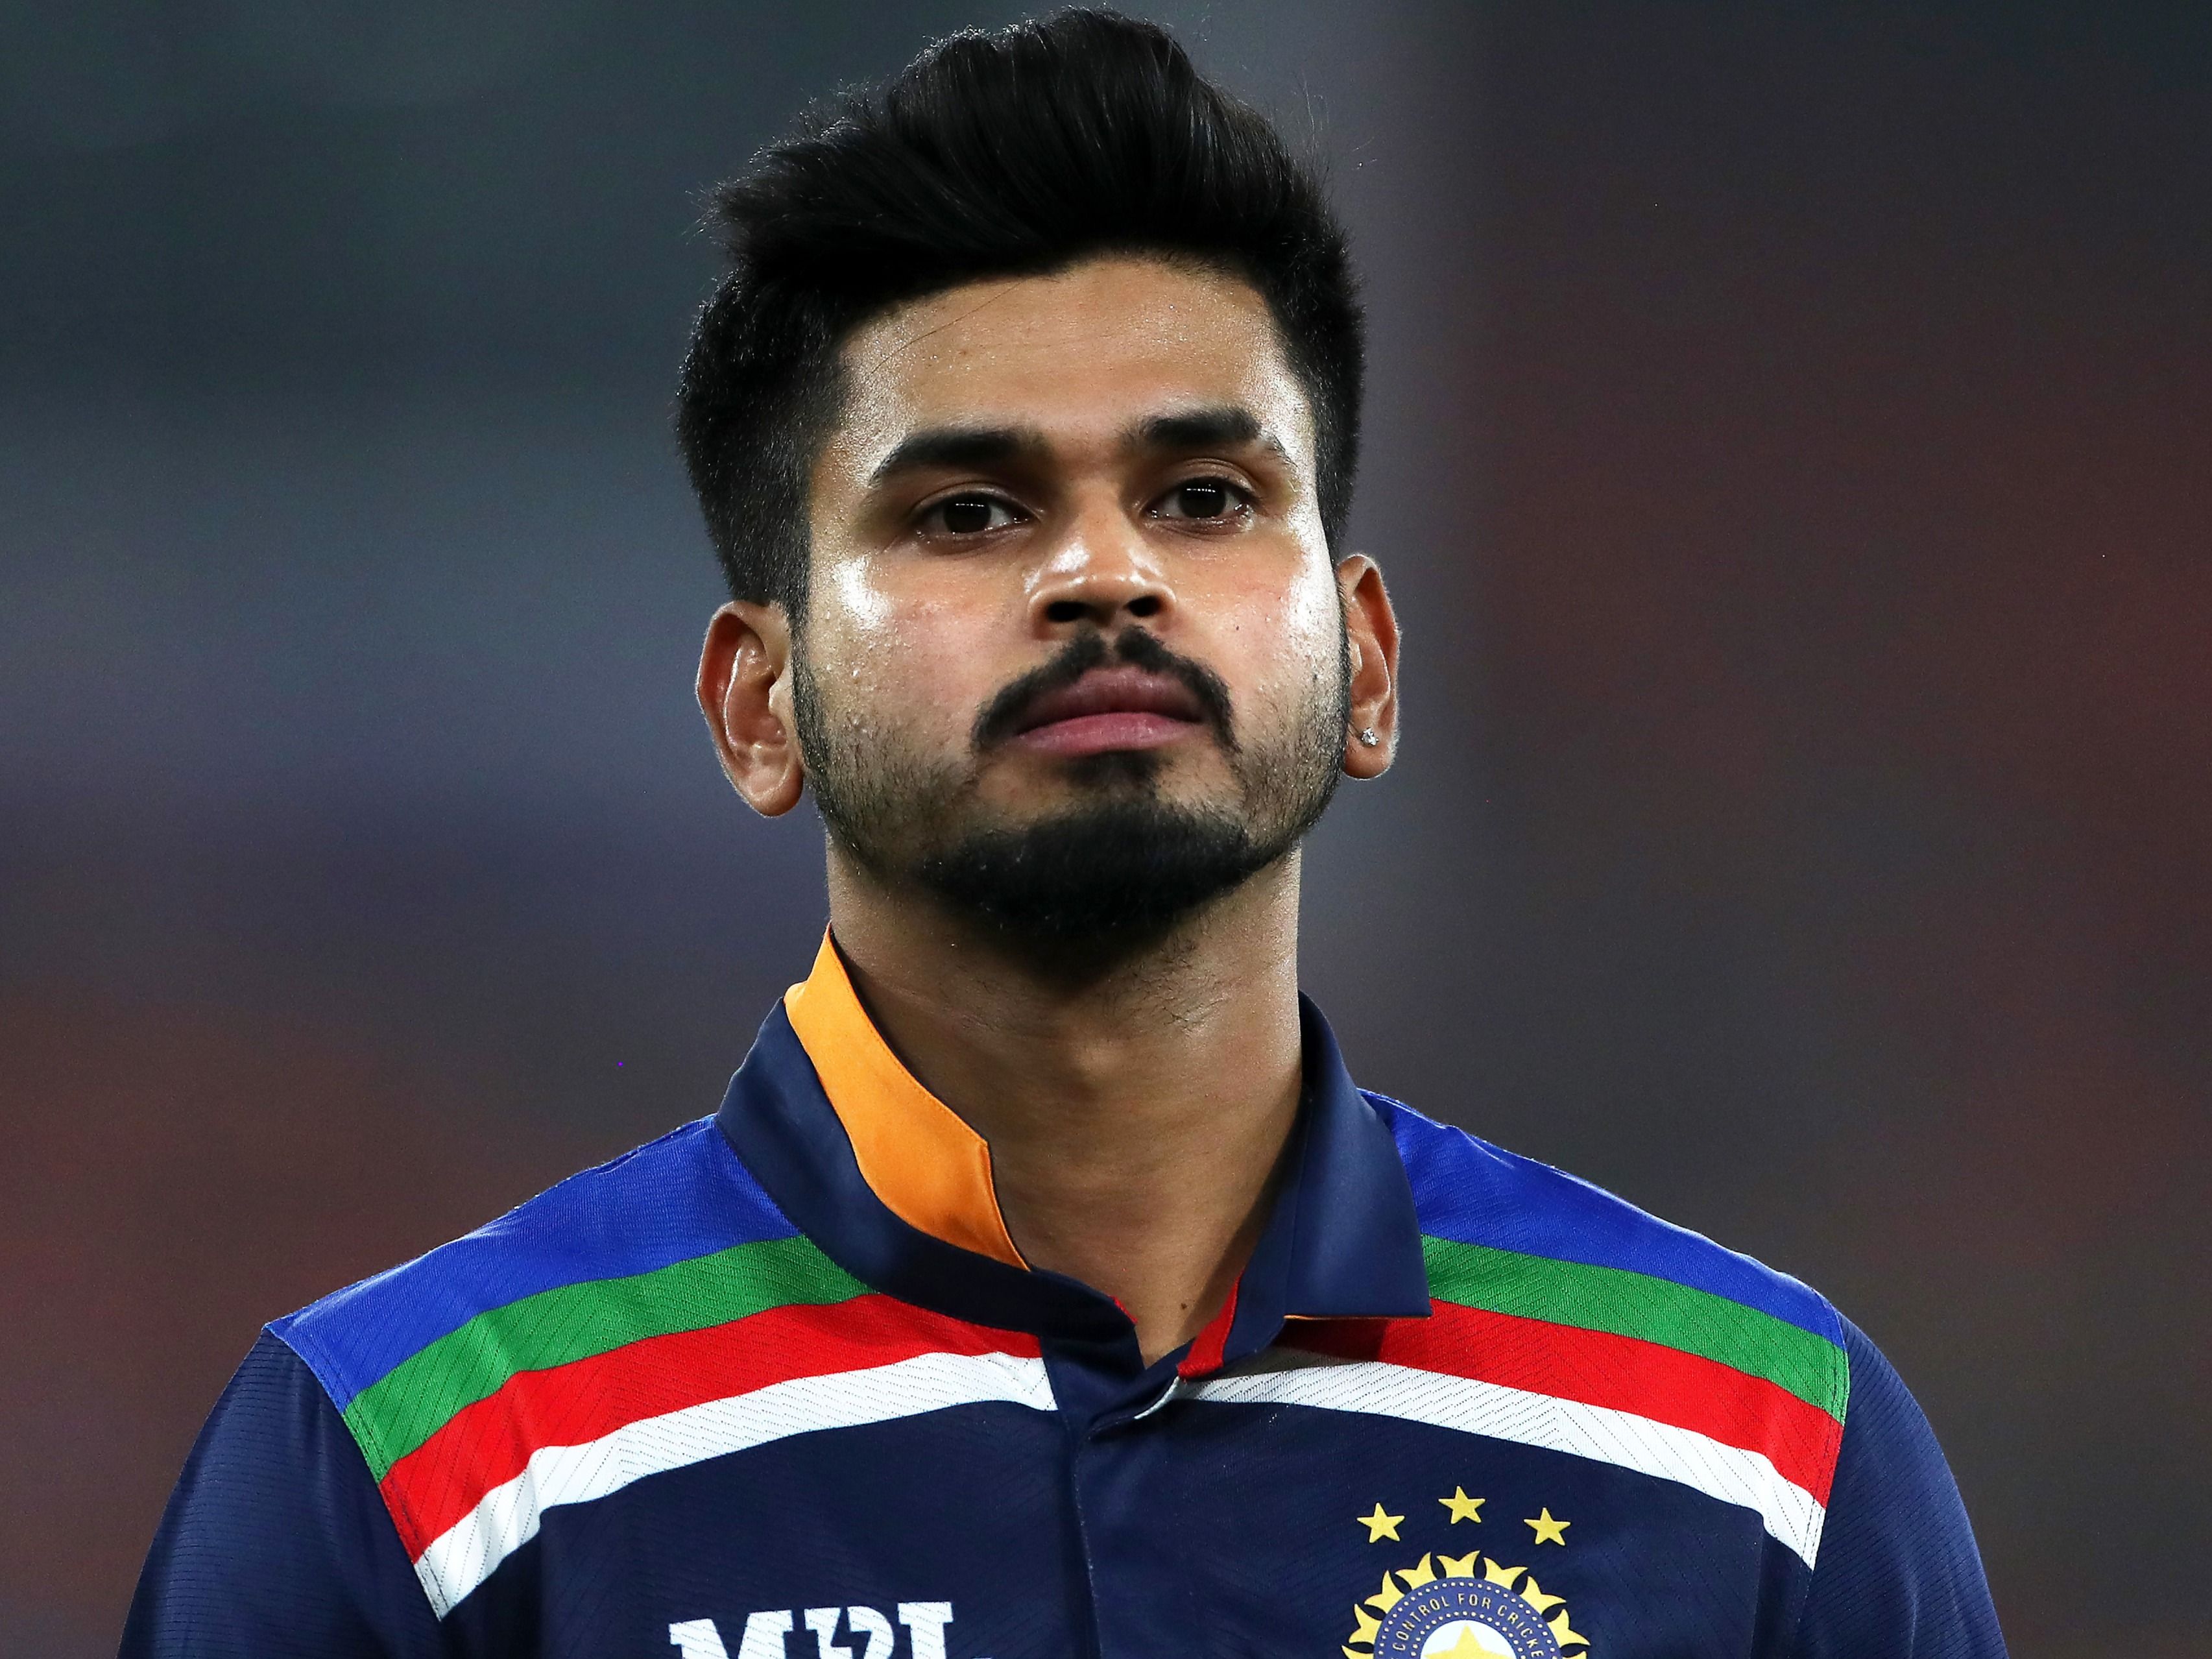 Shreyas Iyer is likely to undergo back surgery which could keep him out of the game for a few months.